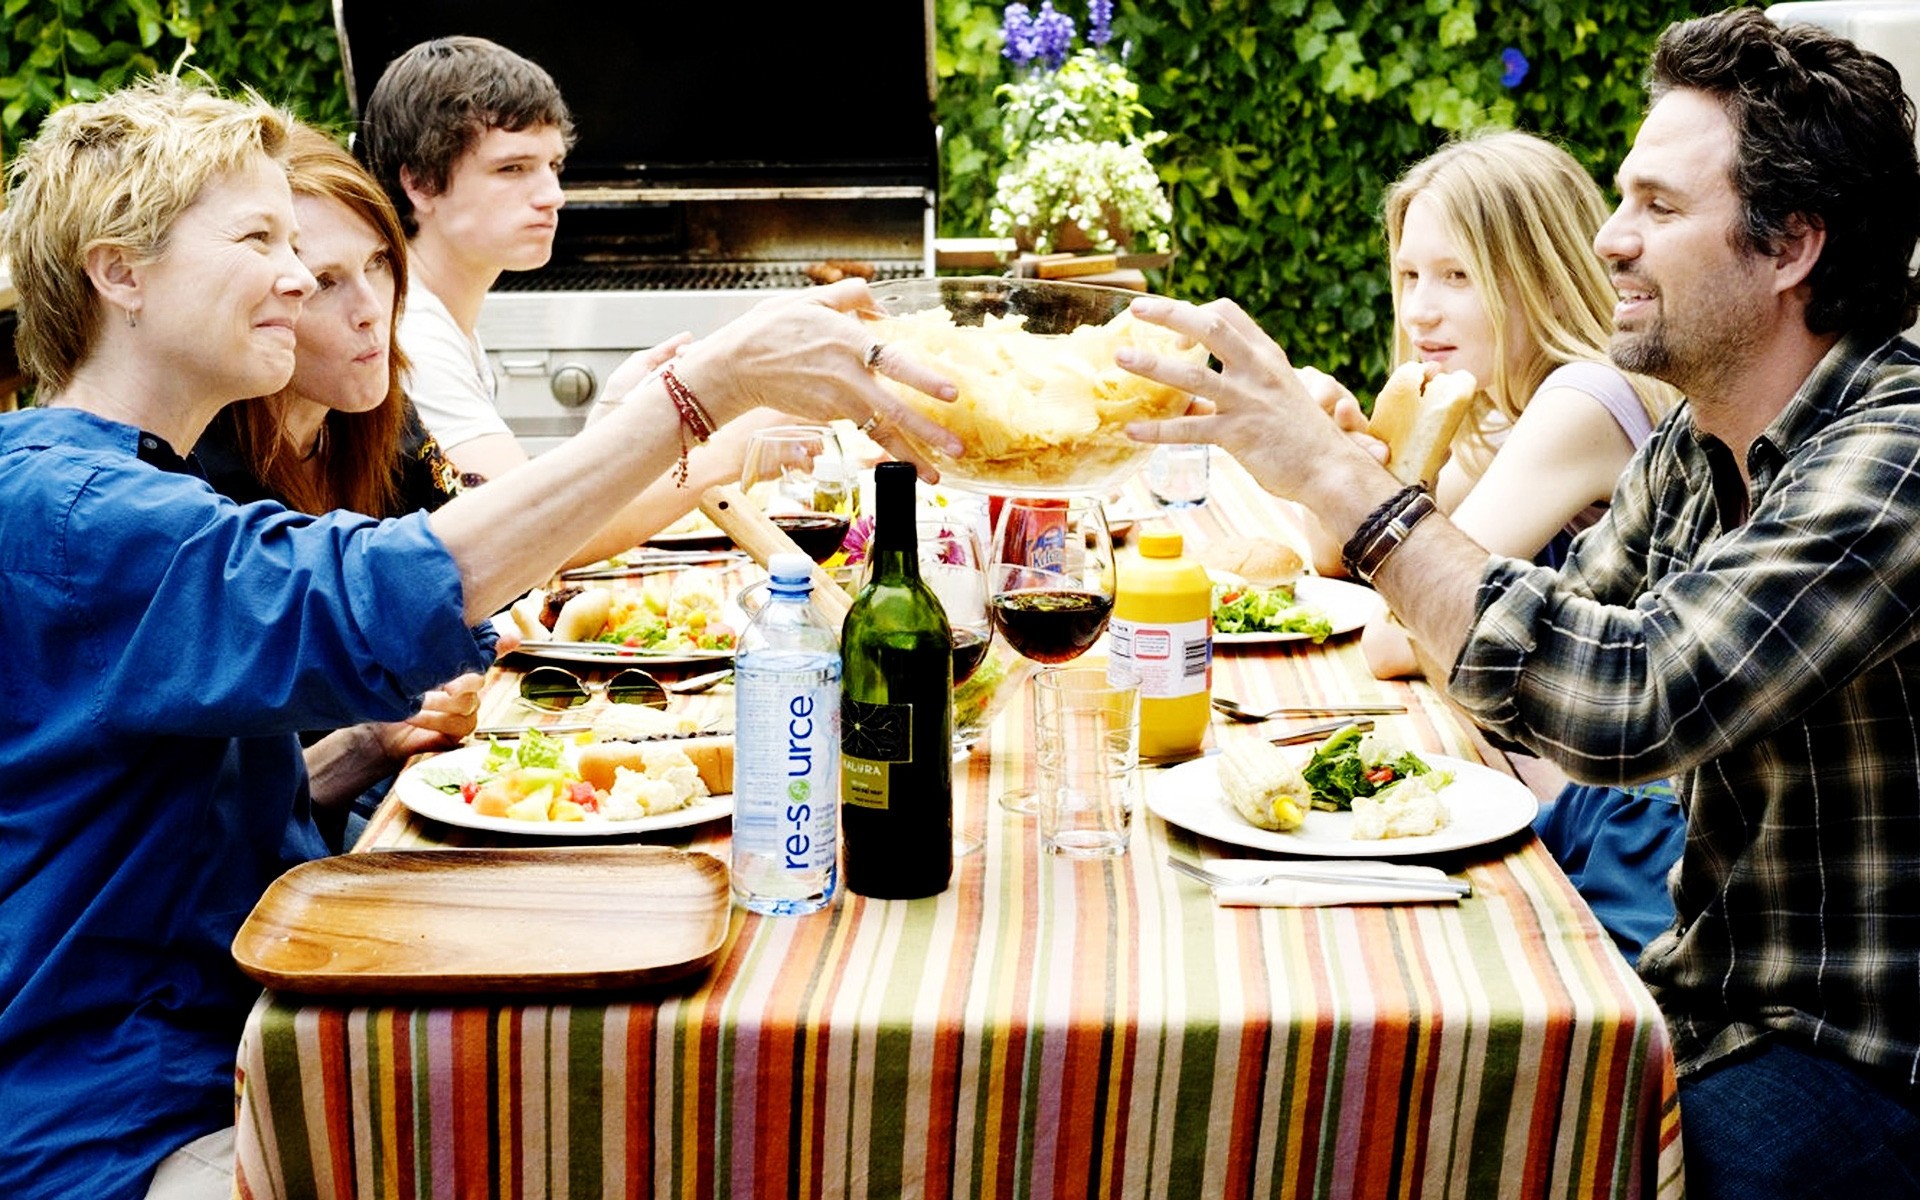 movies man togetherness woman lunch wine enjoyment meal dining sit restaurant outdoors toast table leisure dinner family adult two friendship comedy drama film oscar 2011 new wallpaper